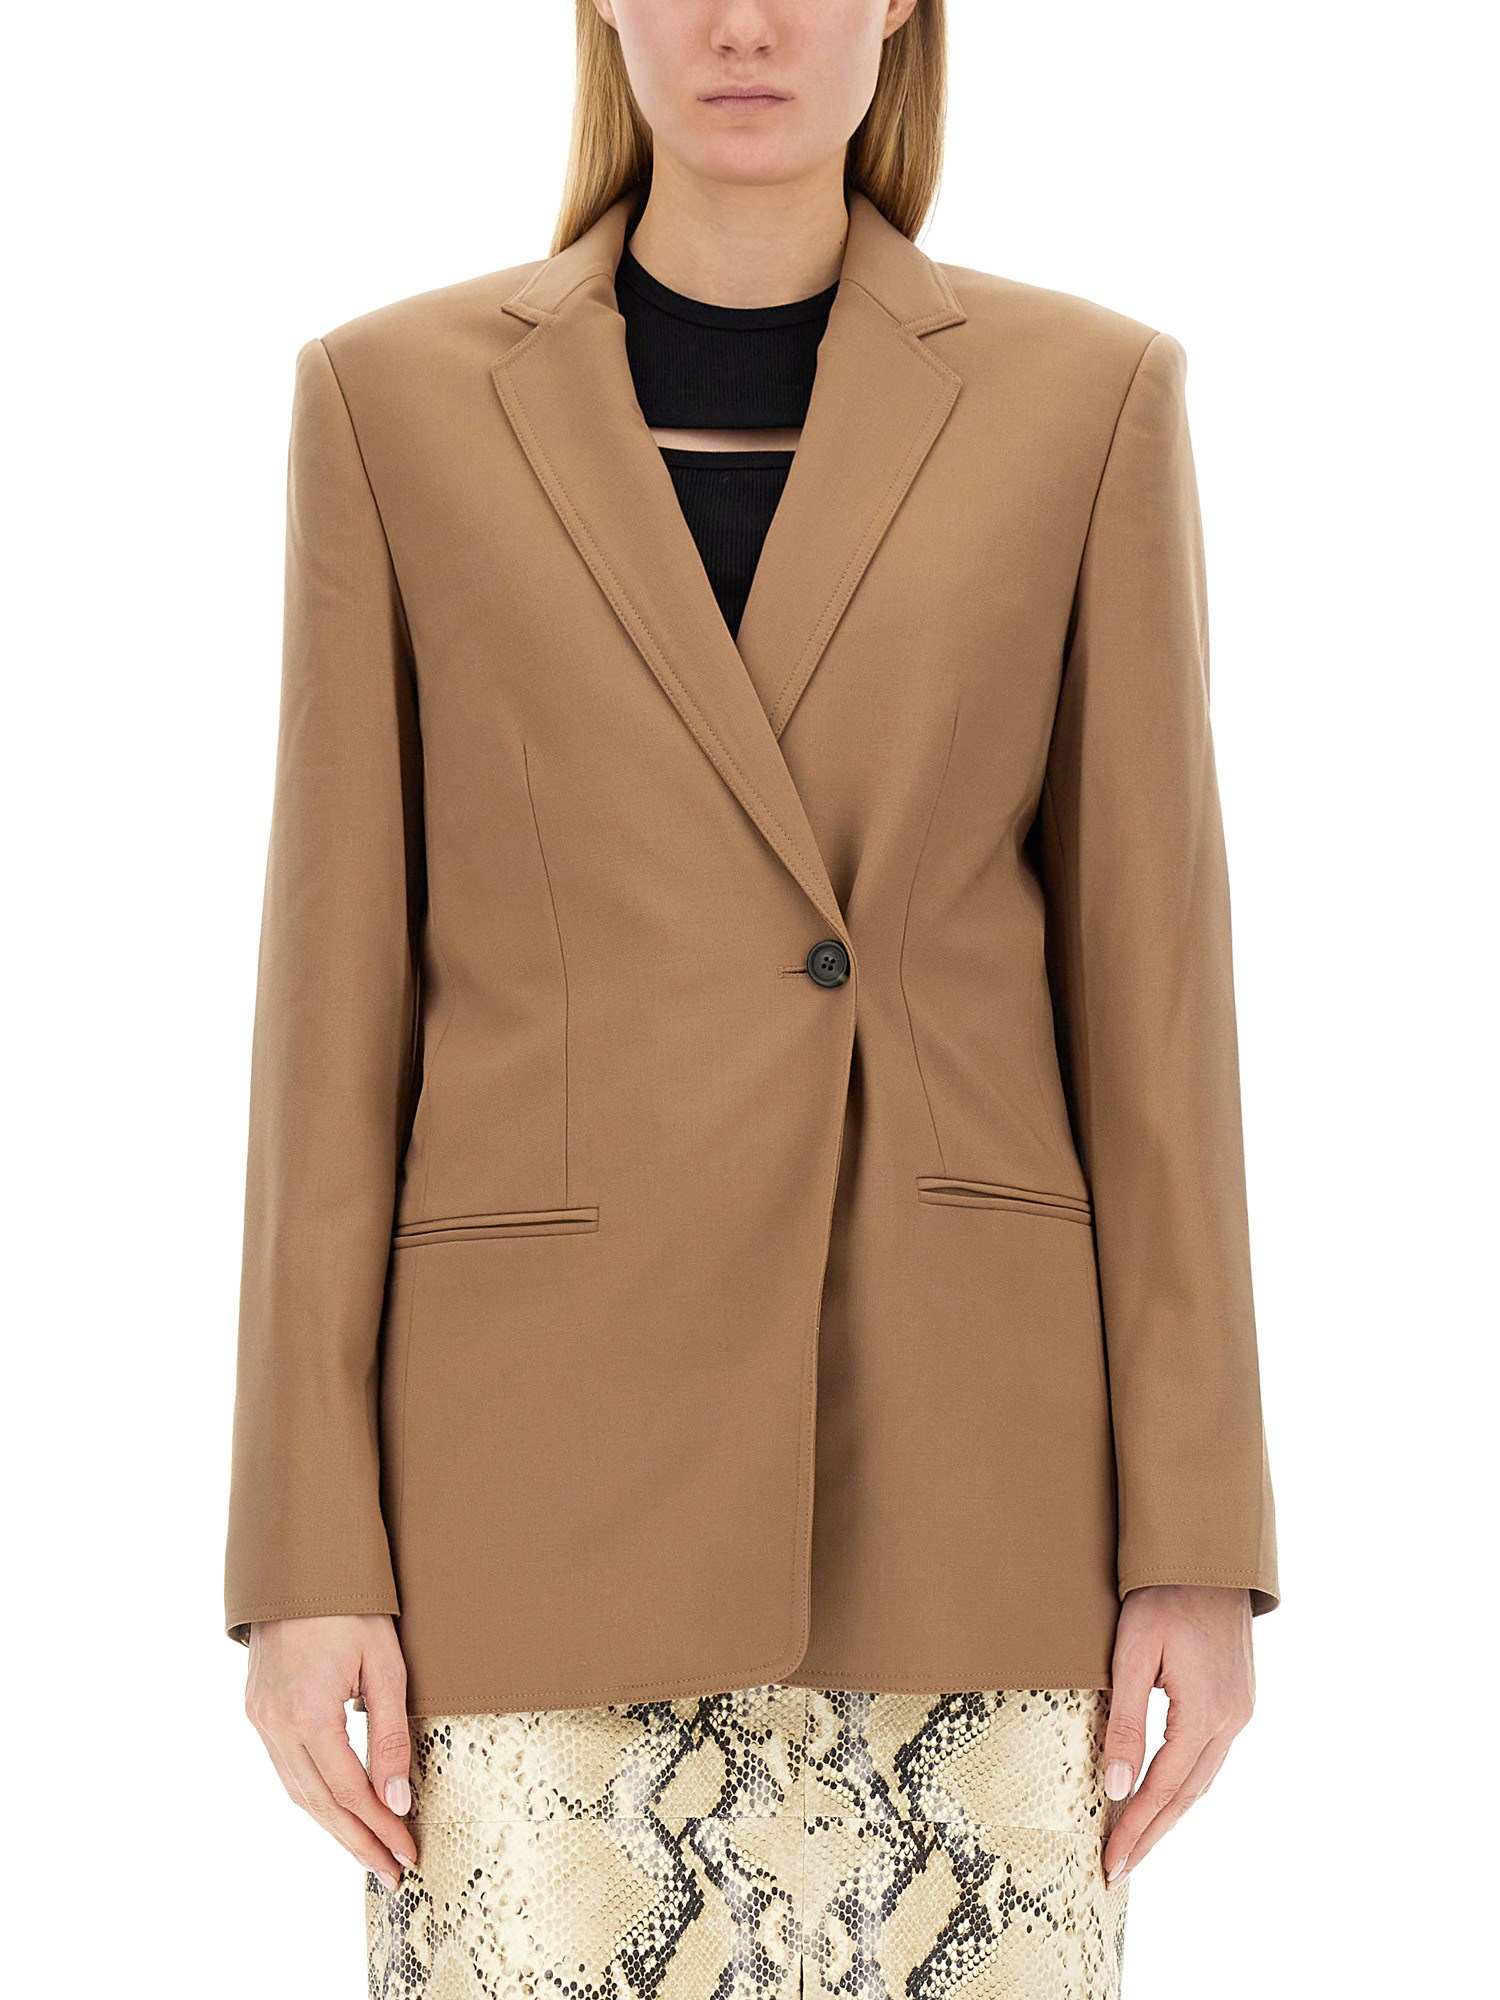 helmut lang single-double breasted blazer